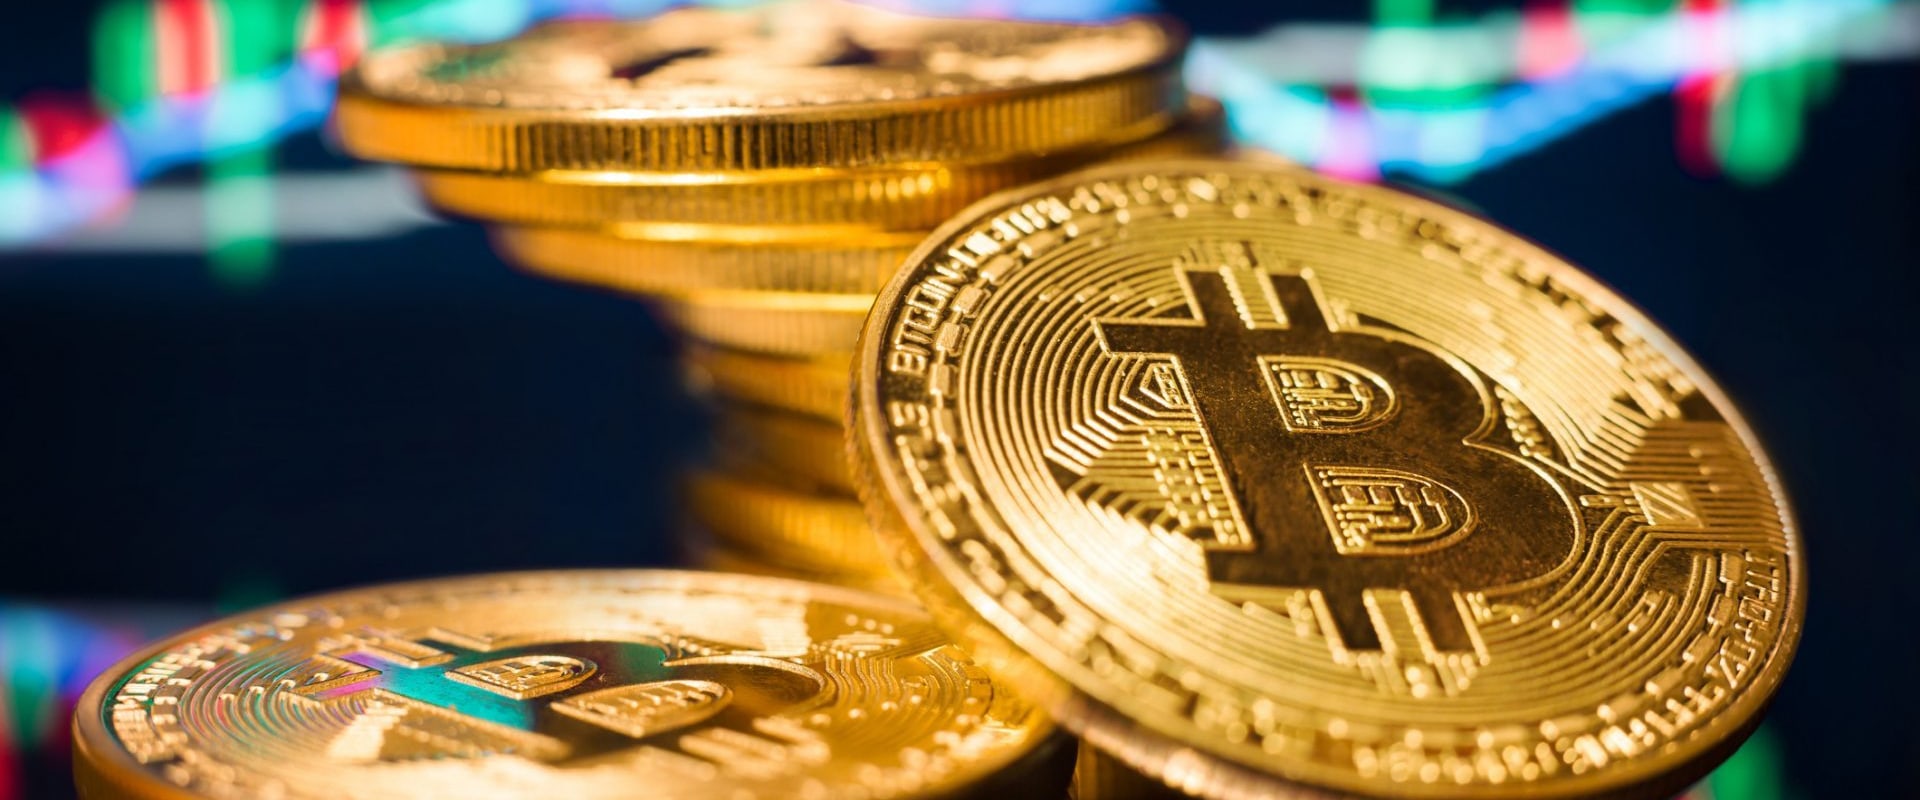 What Will Bitcoin Be Worth in 2023? A Crypto Expert's Perspective